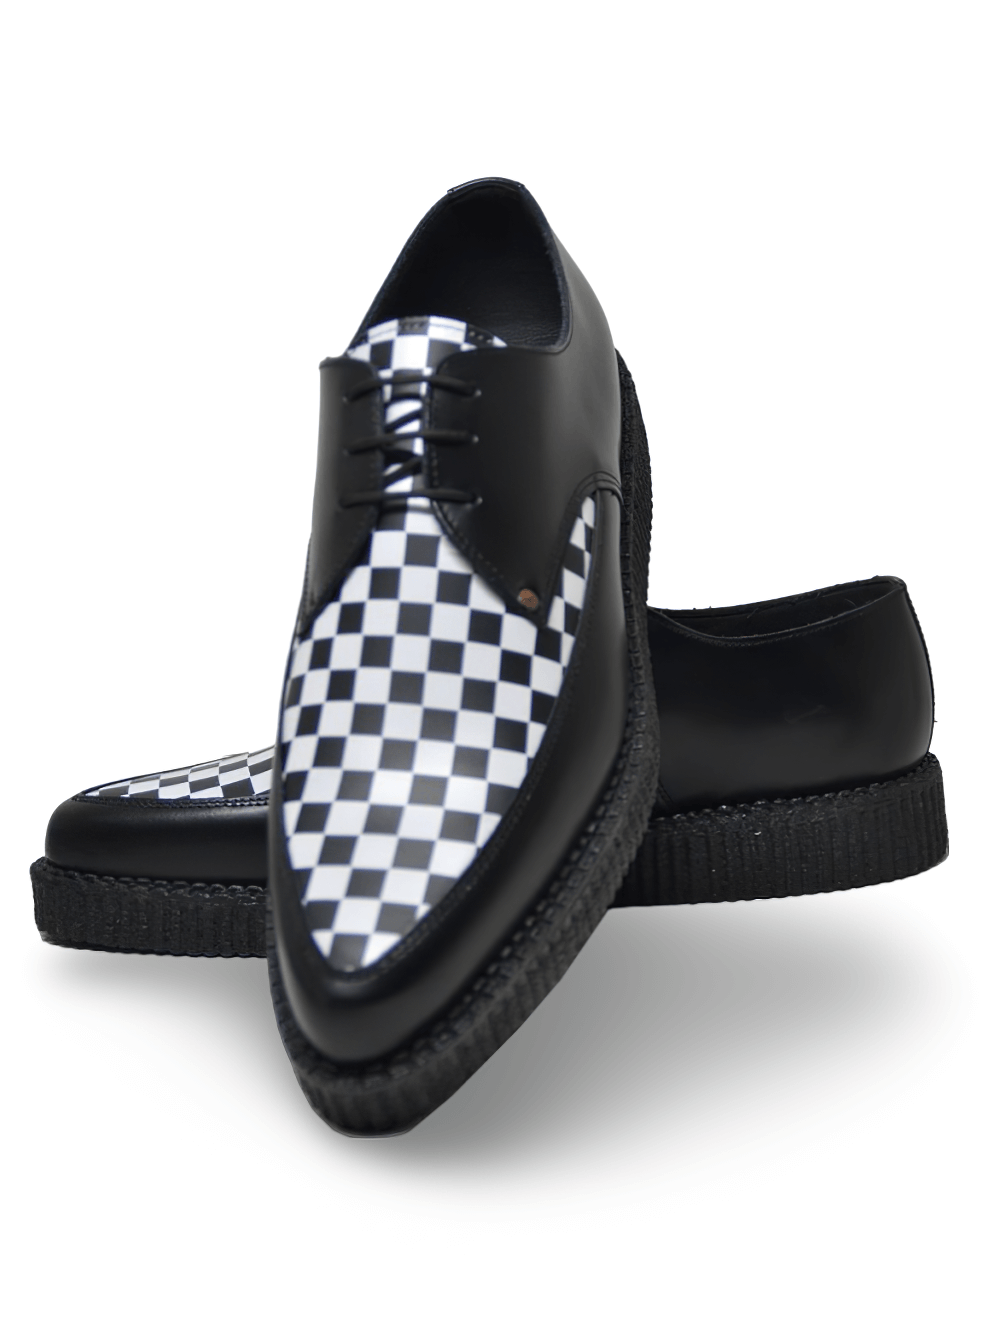 Pointed Creeper Shoes in Black and White Checkerwork